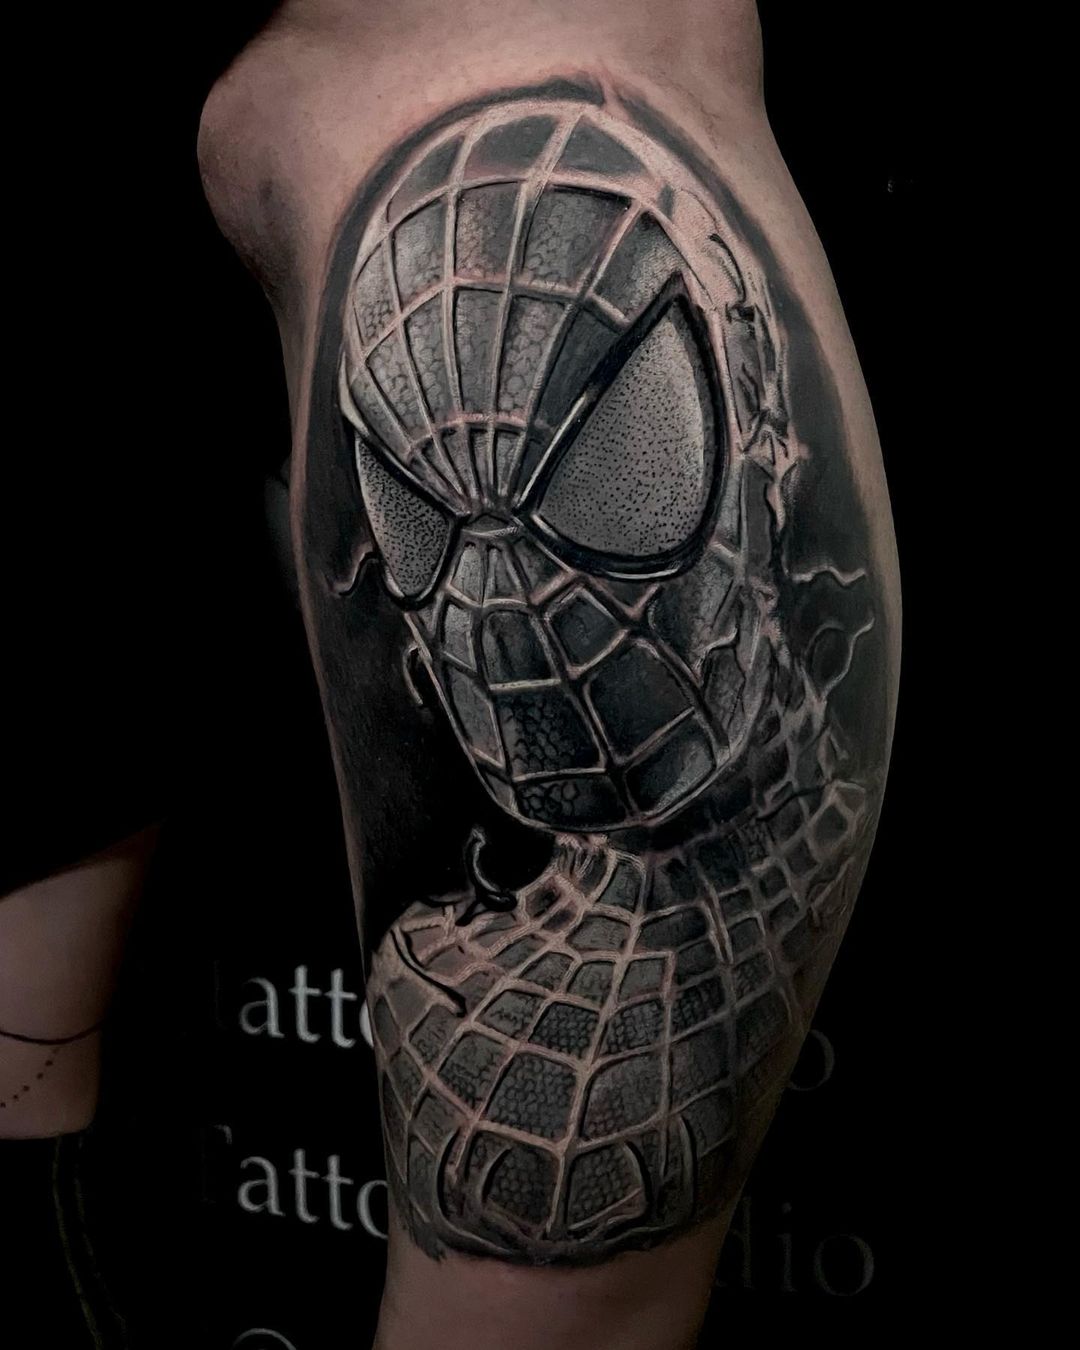 Spidey-Sense Semi-Permanent Tattoo. Lasts 1-2 weeks. Painless and easy to  apply. Organic ink. Browse more or create your own. | Spiderman tattoo,  Marvel tattoos, Tattoos